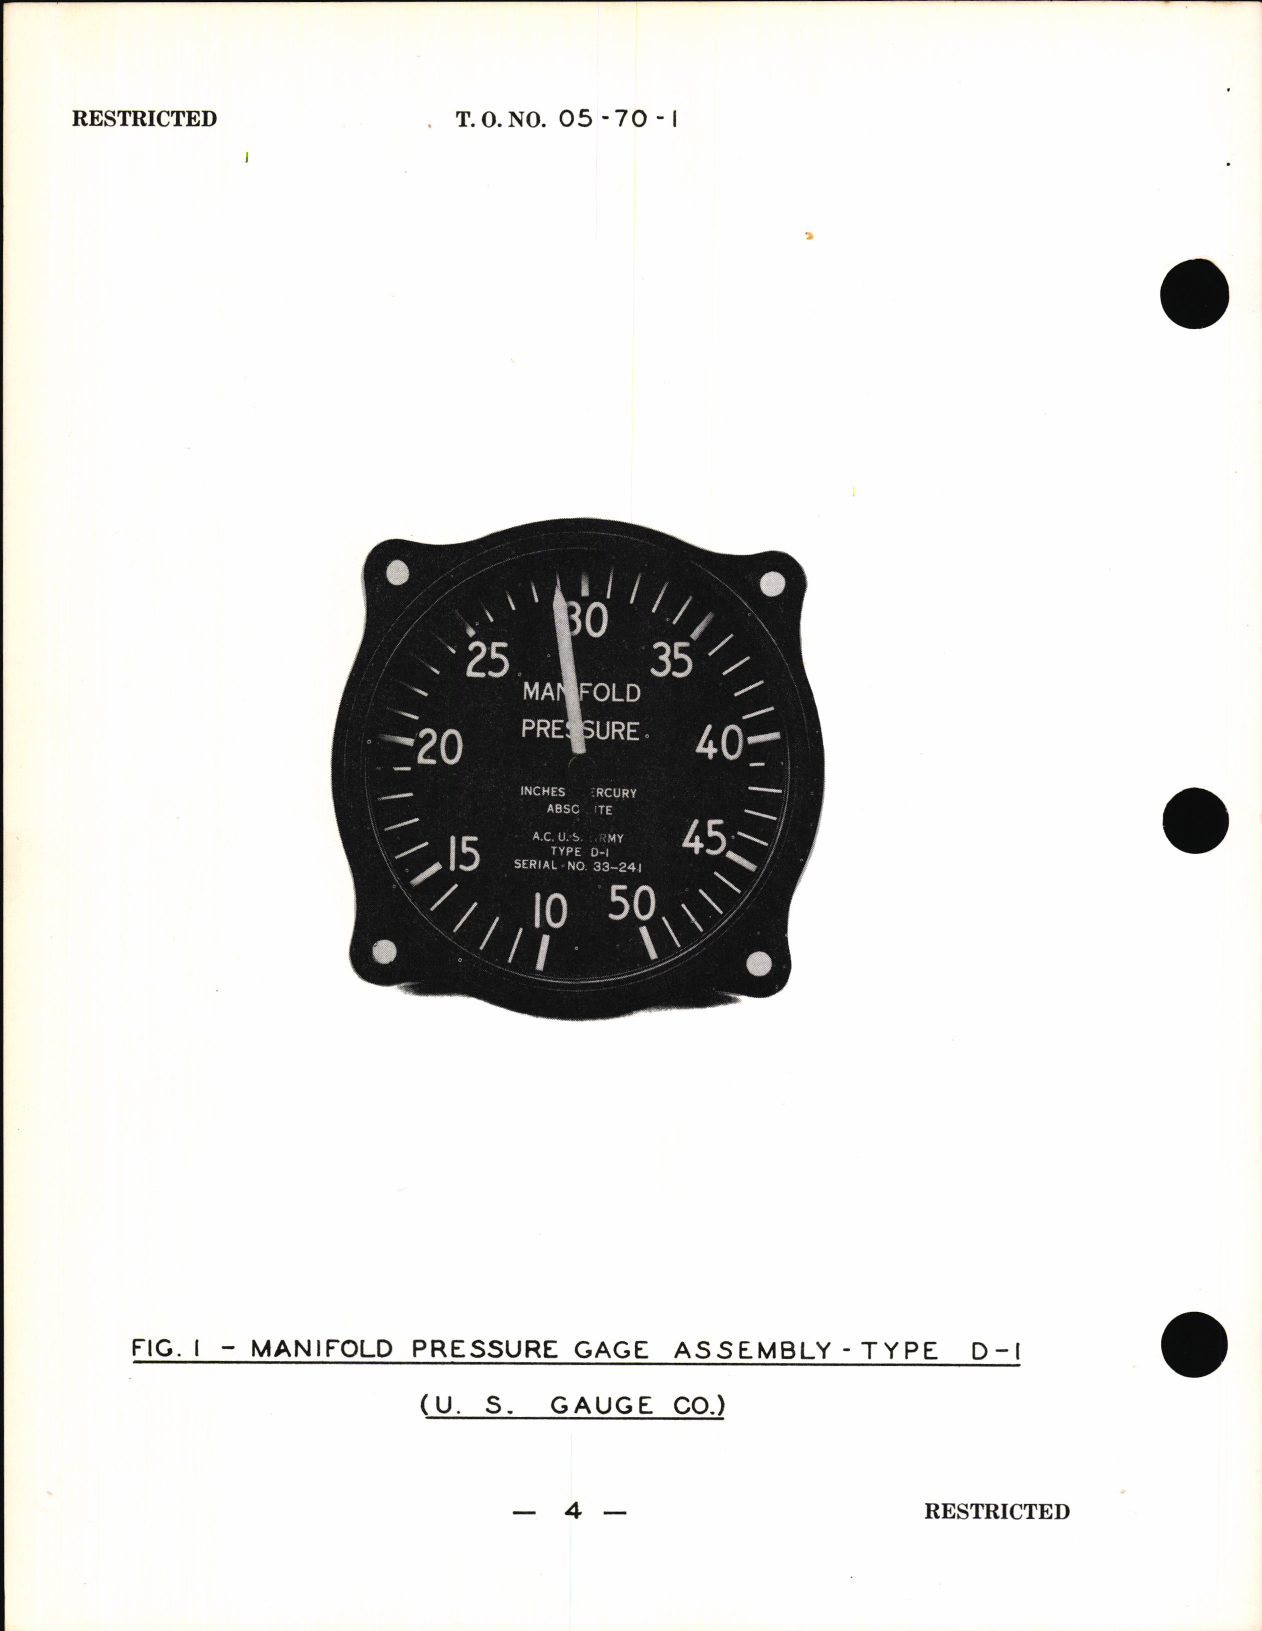 Sample page 6 from AirCorps Library document: Handbook of Instructions with Parts Catalog For Manifold Pressure Gage Types D-1 and D-2